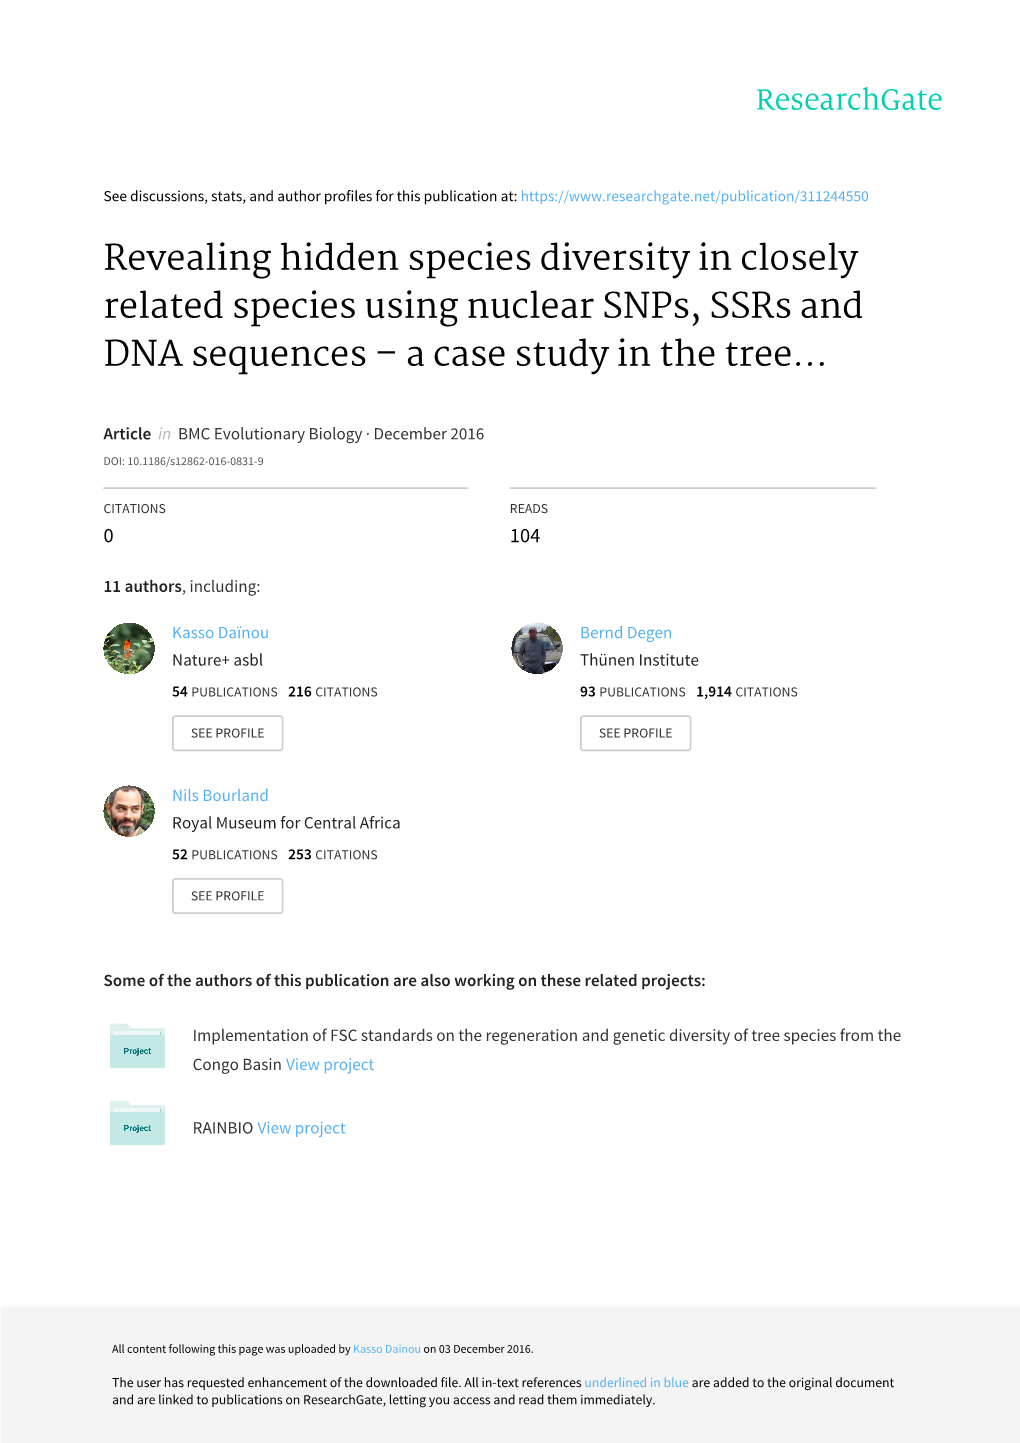 Revealing Hidden Species Diversity in Closely Related Species Using Nuclear Snps, Ssrs and DNA Sequences – a Case Study in the Tree